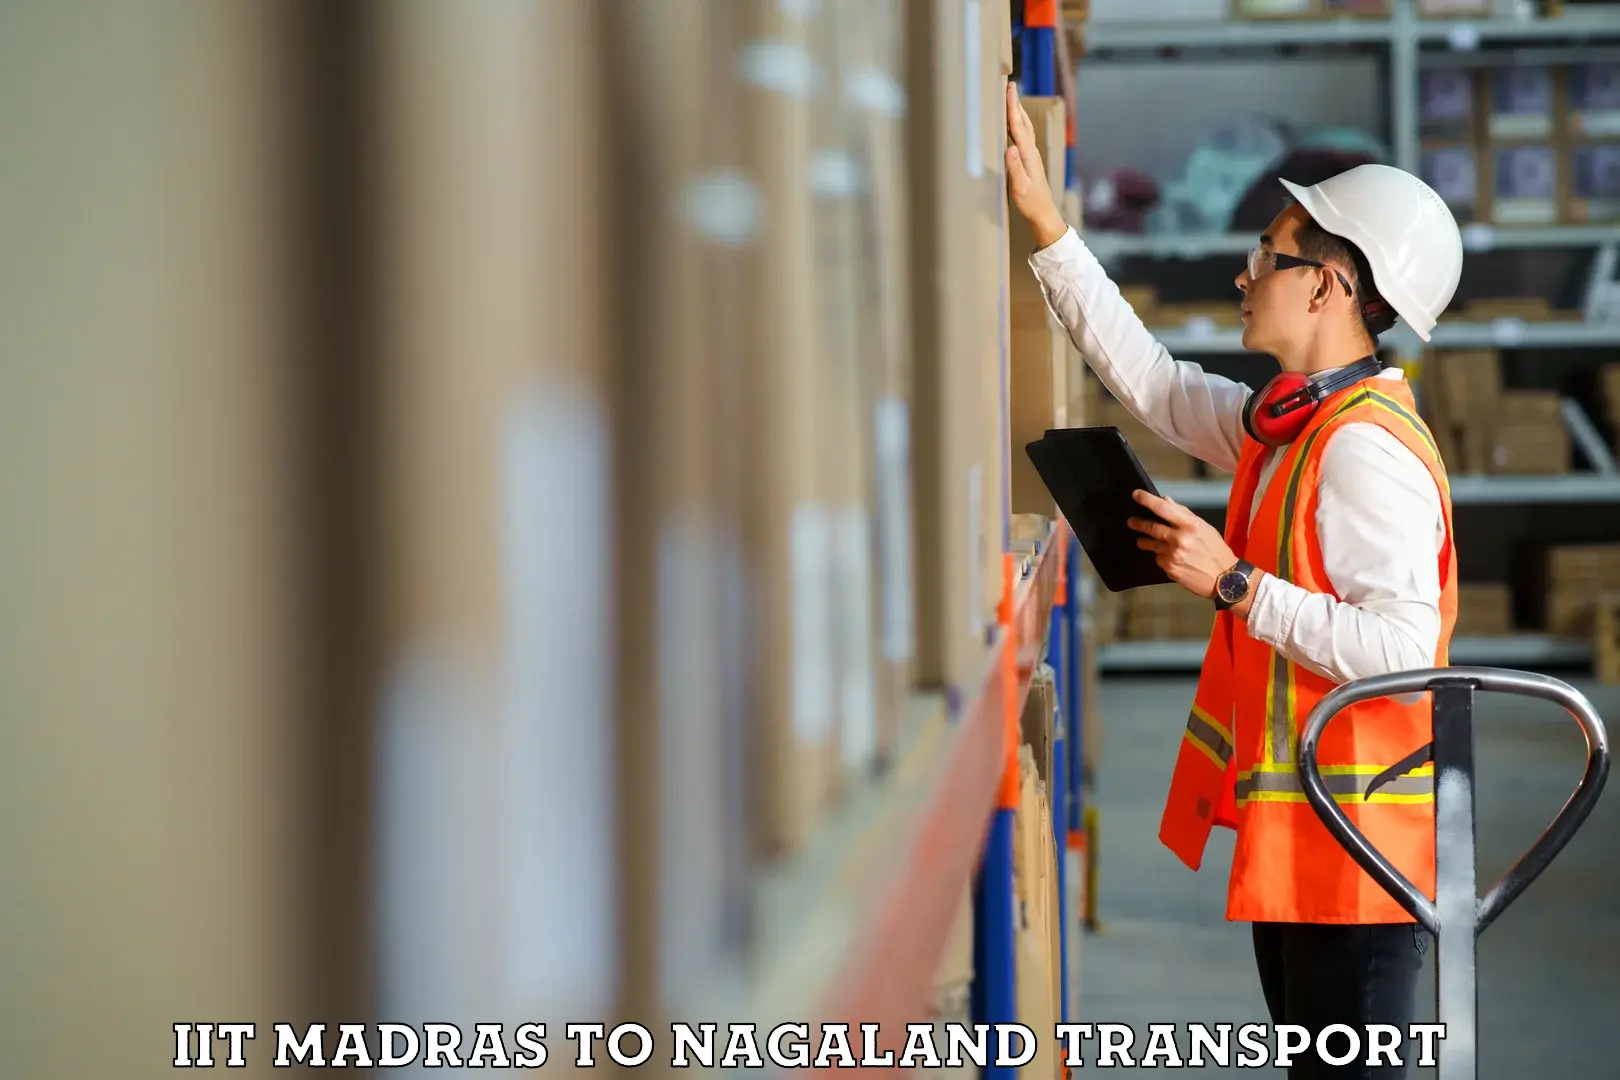 Express transport services IIT Madras to Nagaland